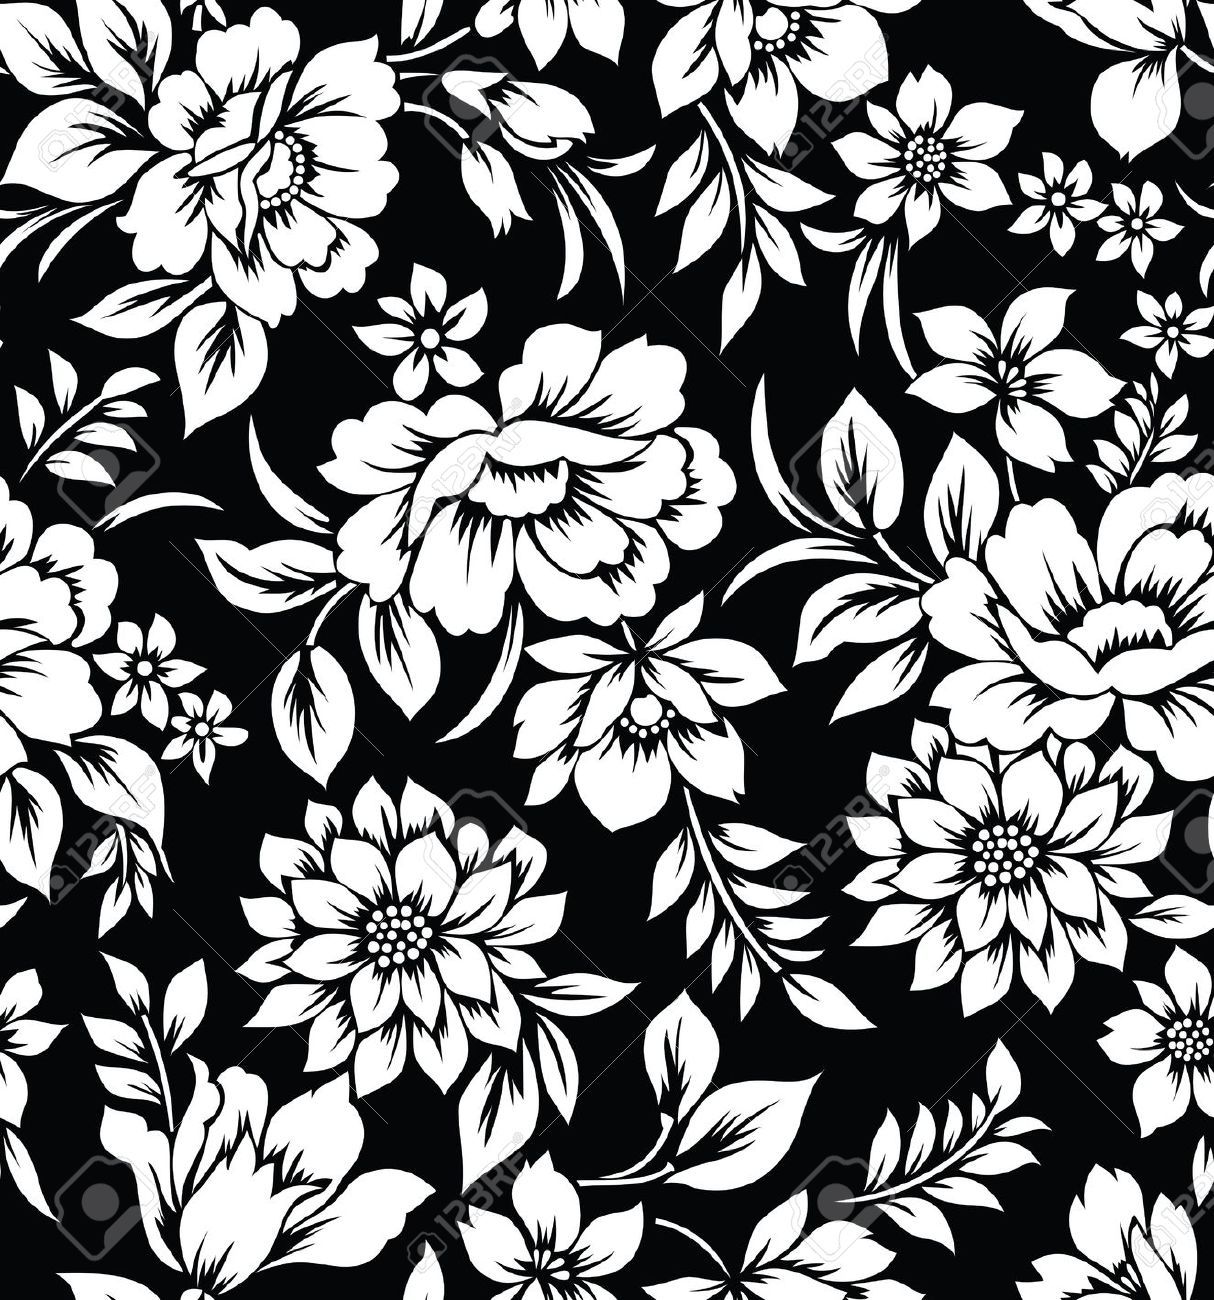 B W Floral Designs - Pattern Flower Design Black And White , HD Wallpaper & Backgrounds